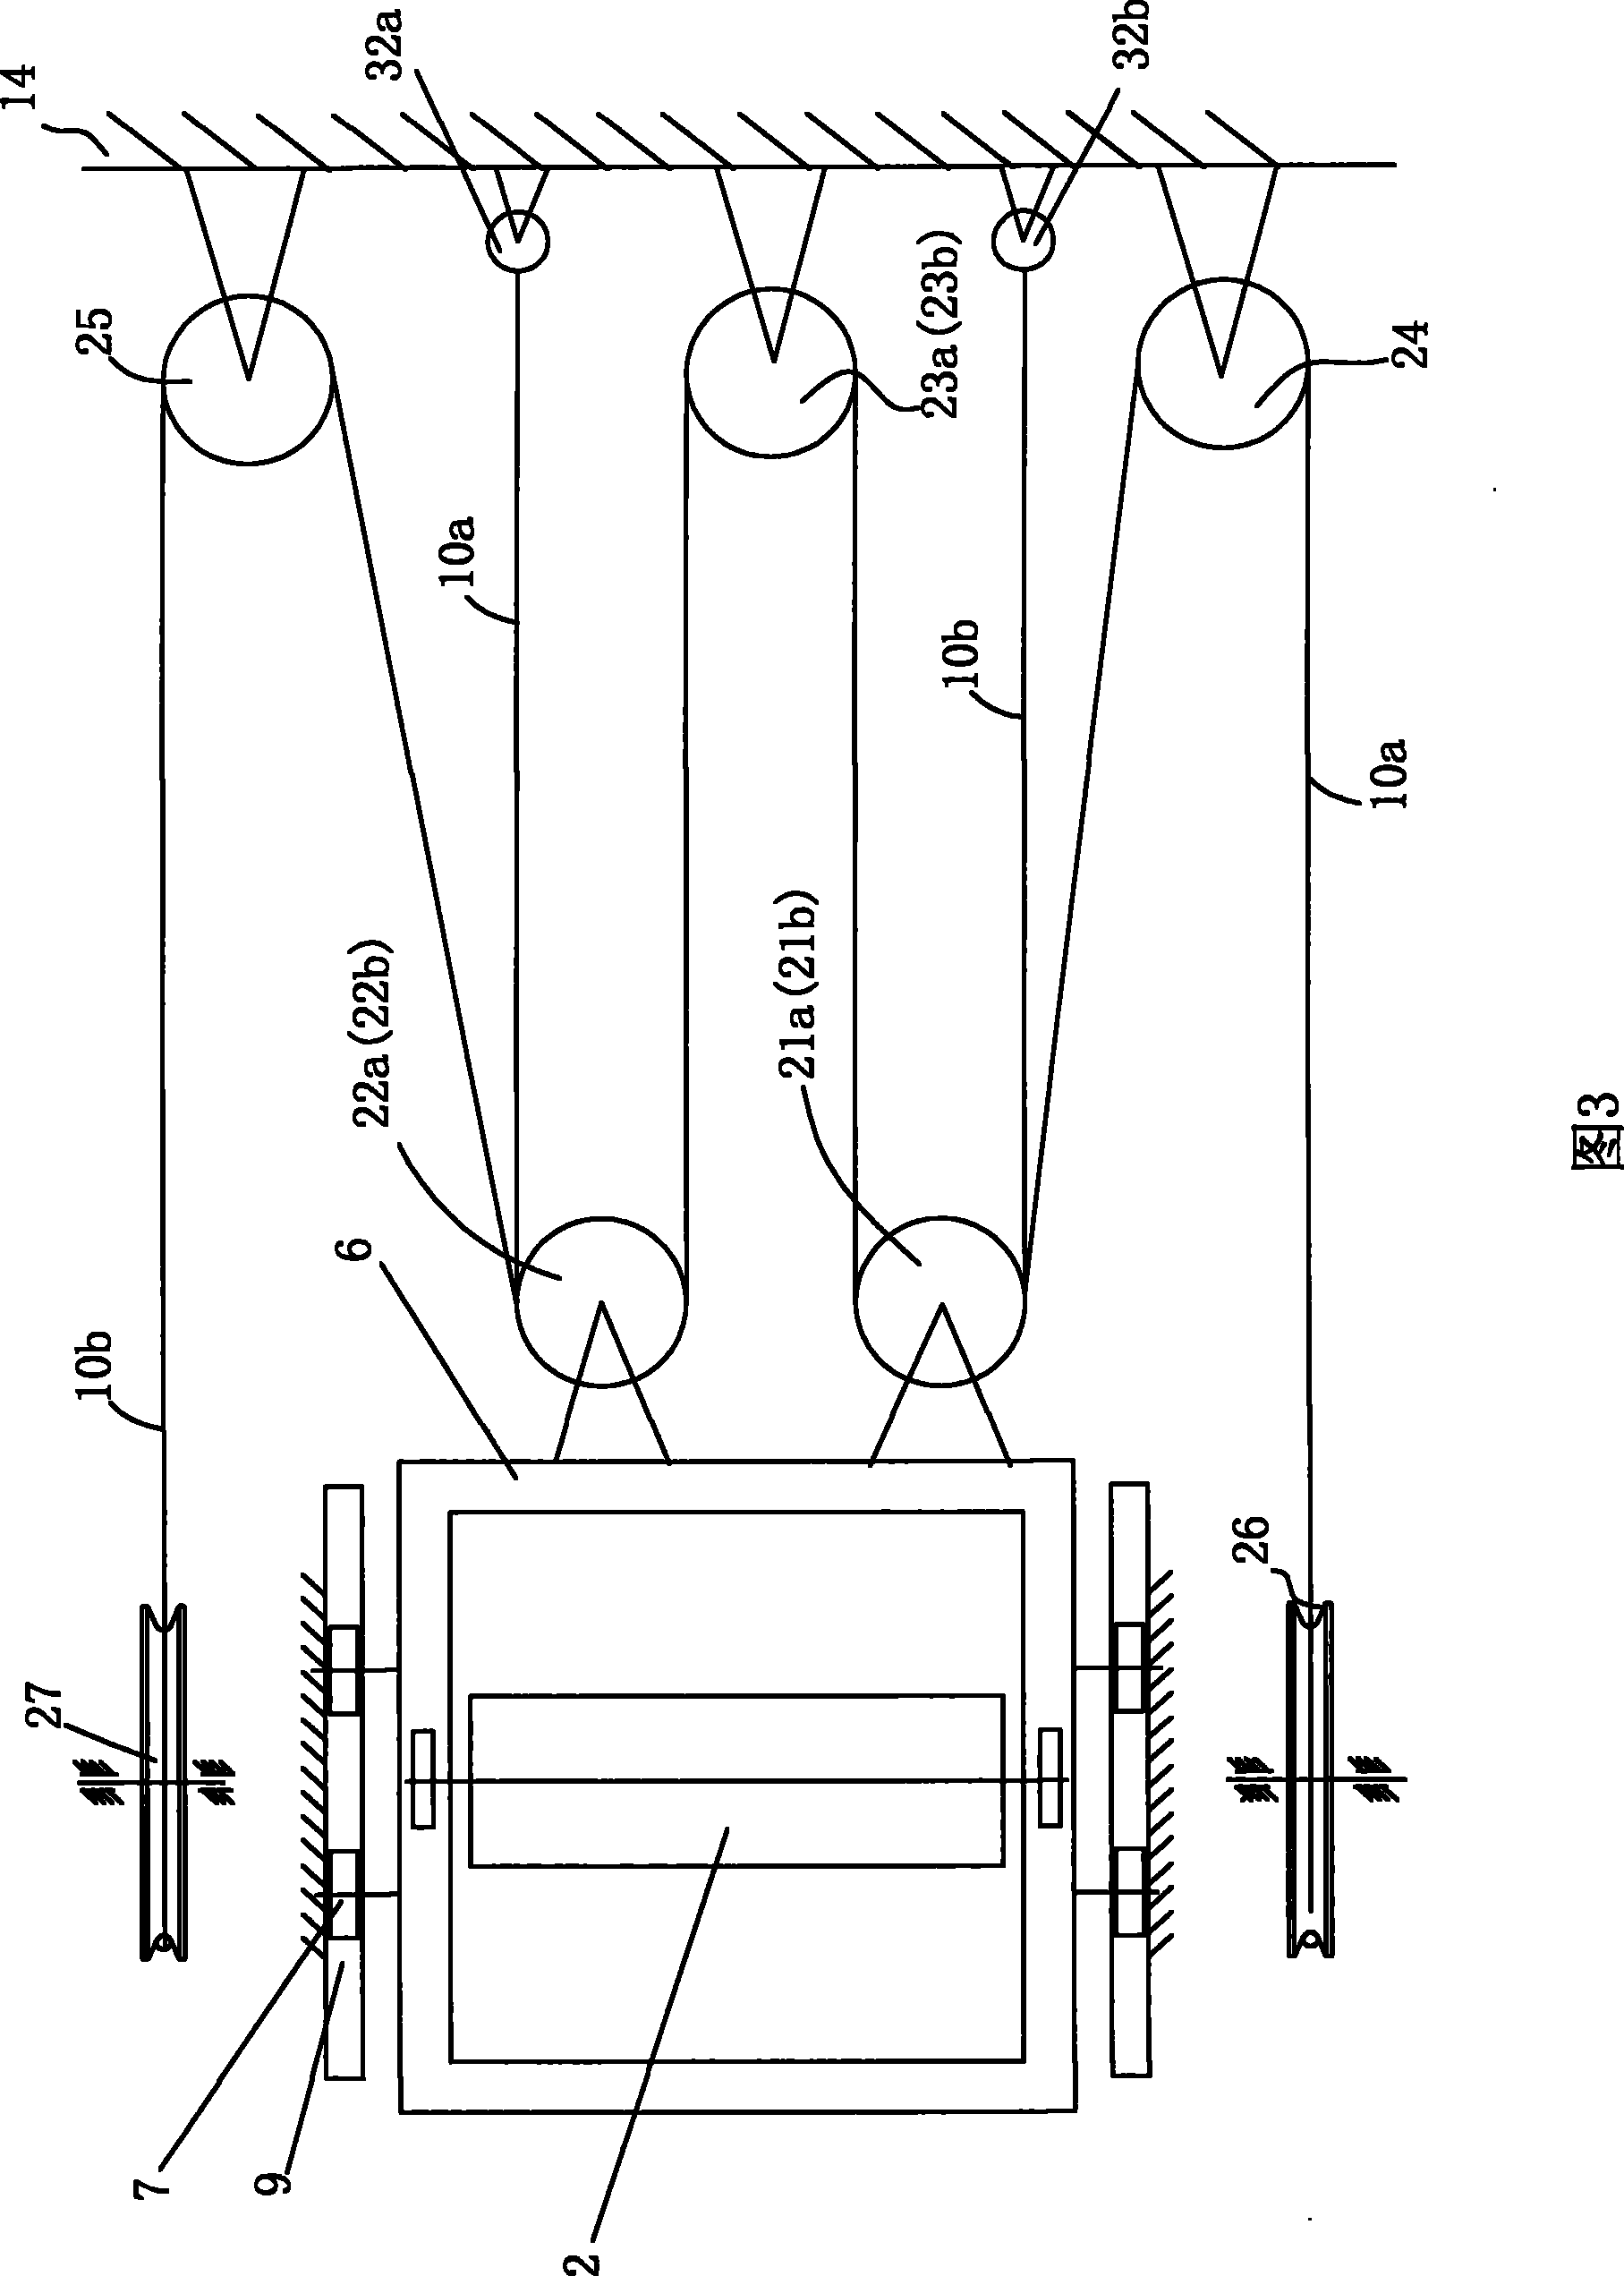 Tension device for belt conveyer